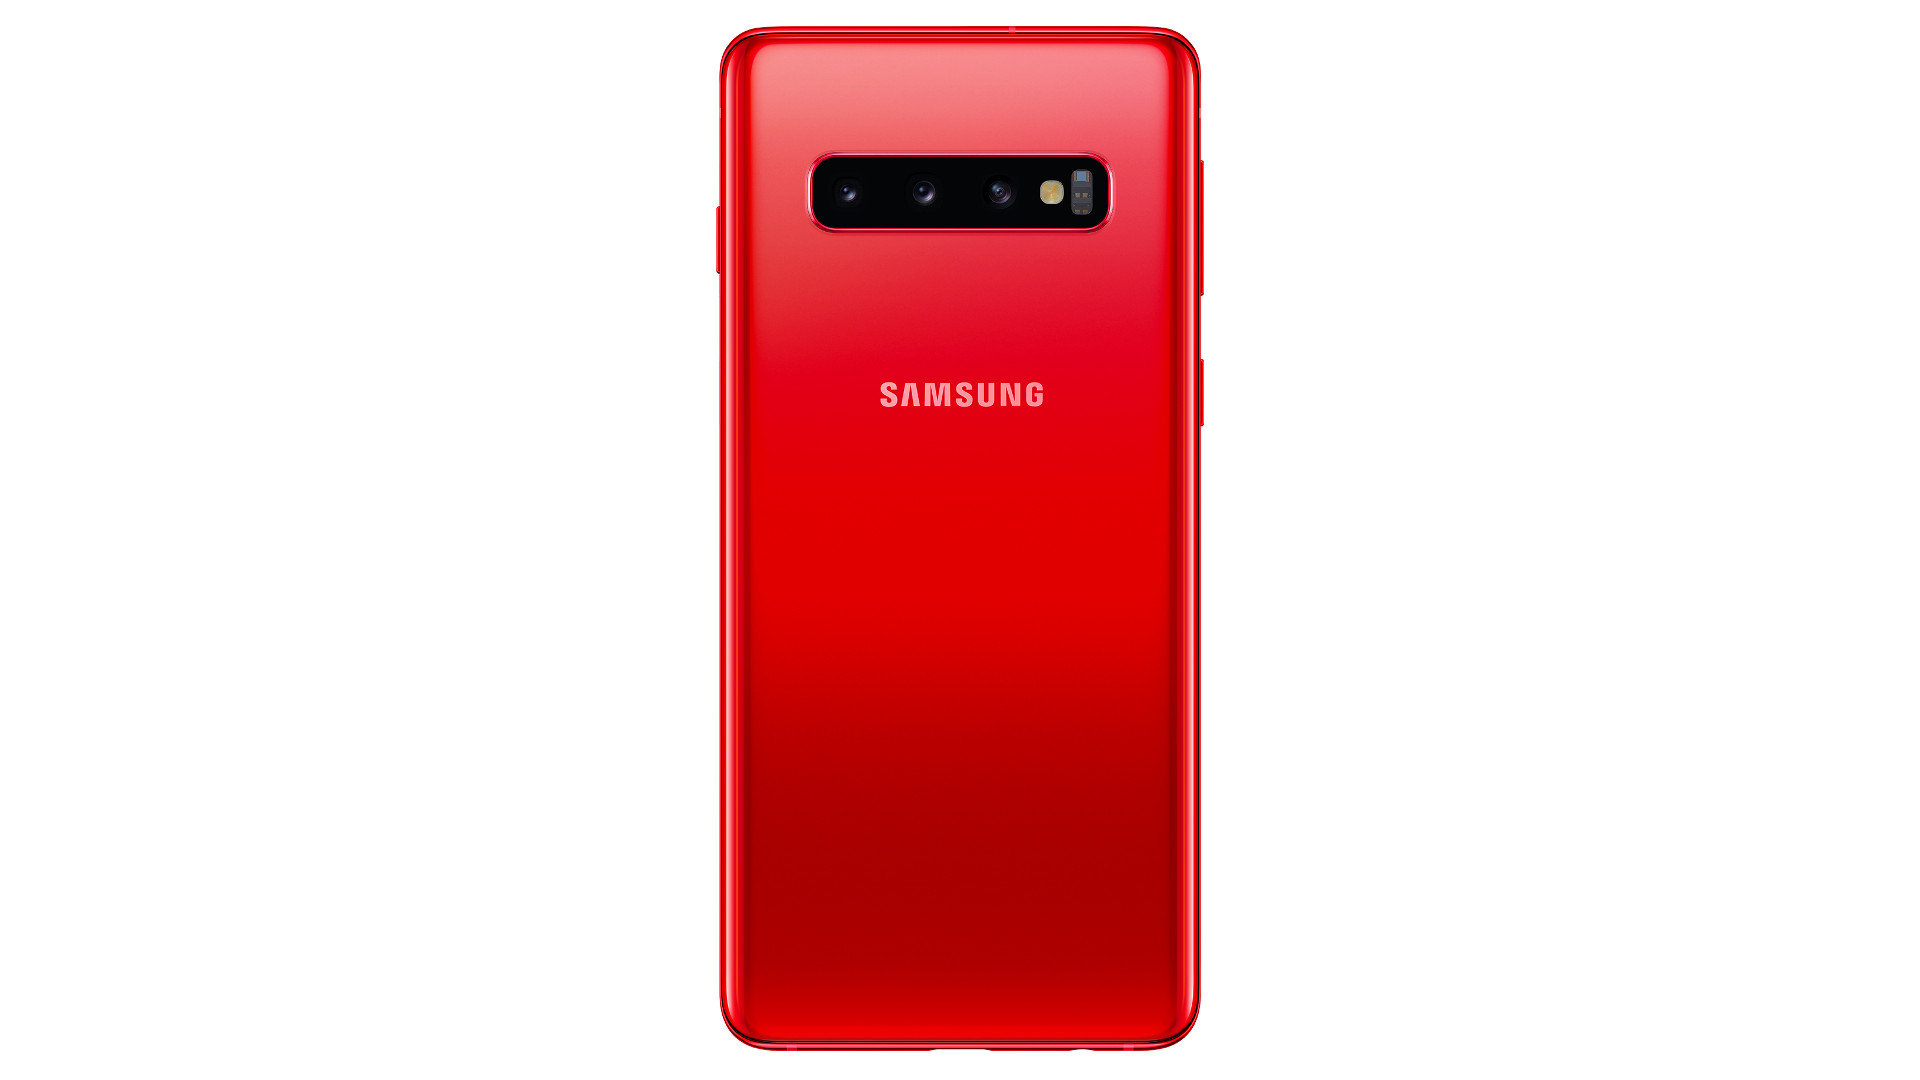 The Samsung Galaxy S10 series in Cardinal Red.